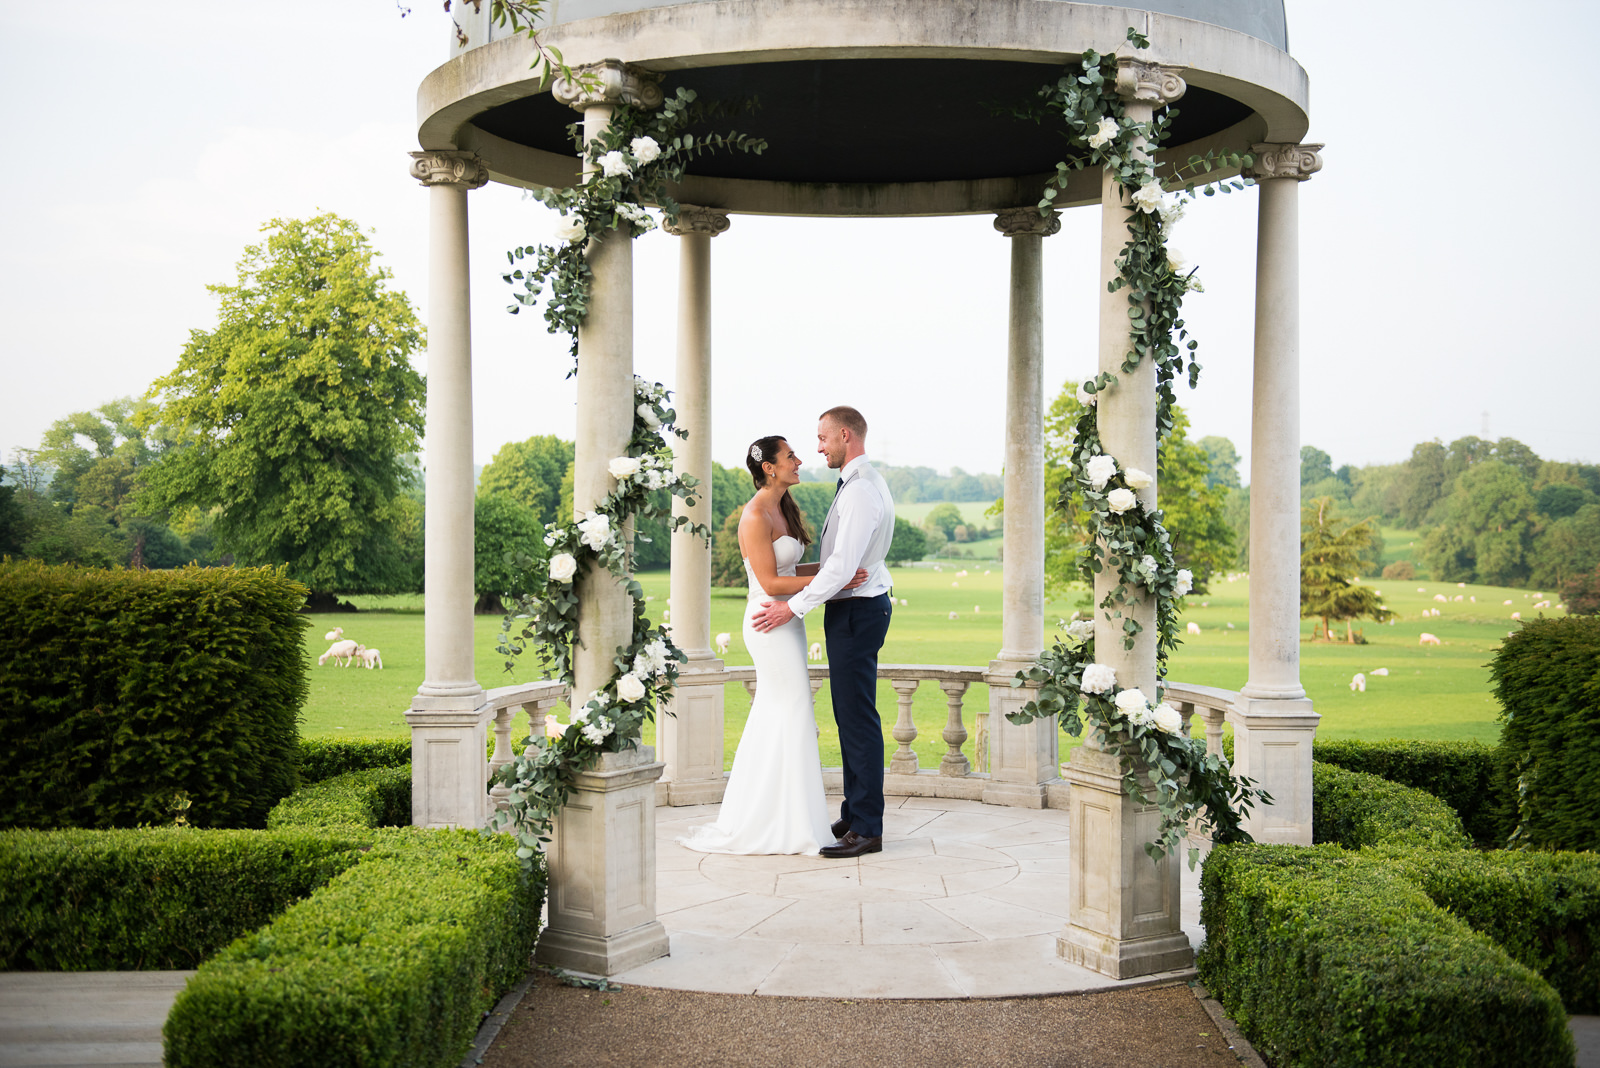 Bride and groom photos at Froyle Park in Hampshire.